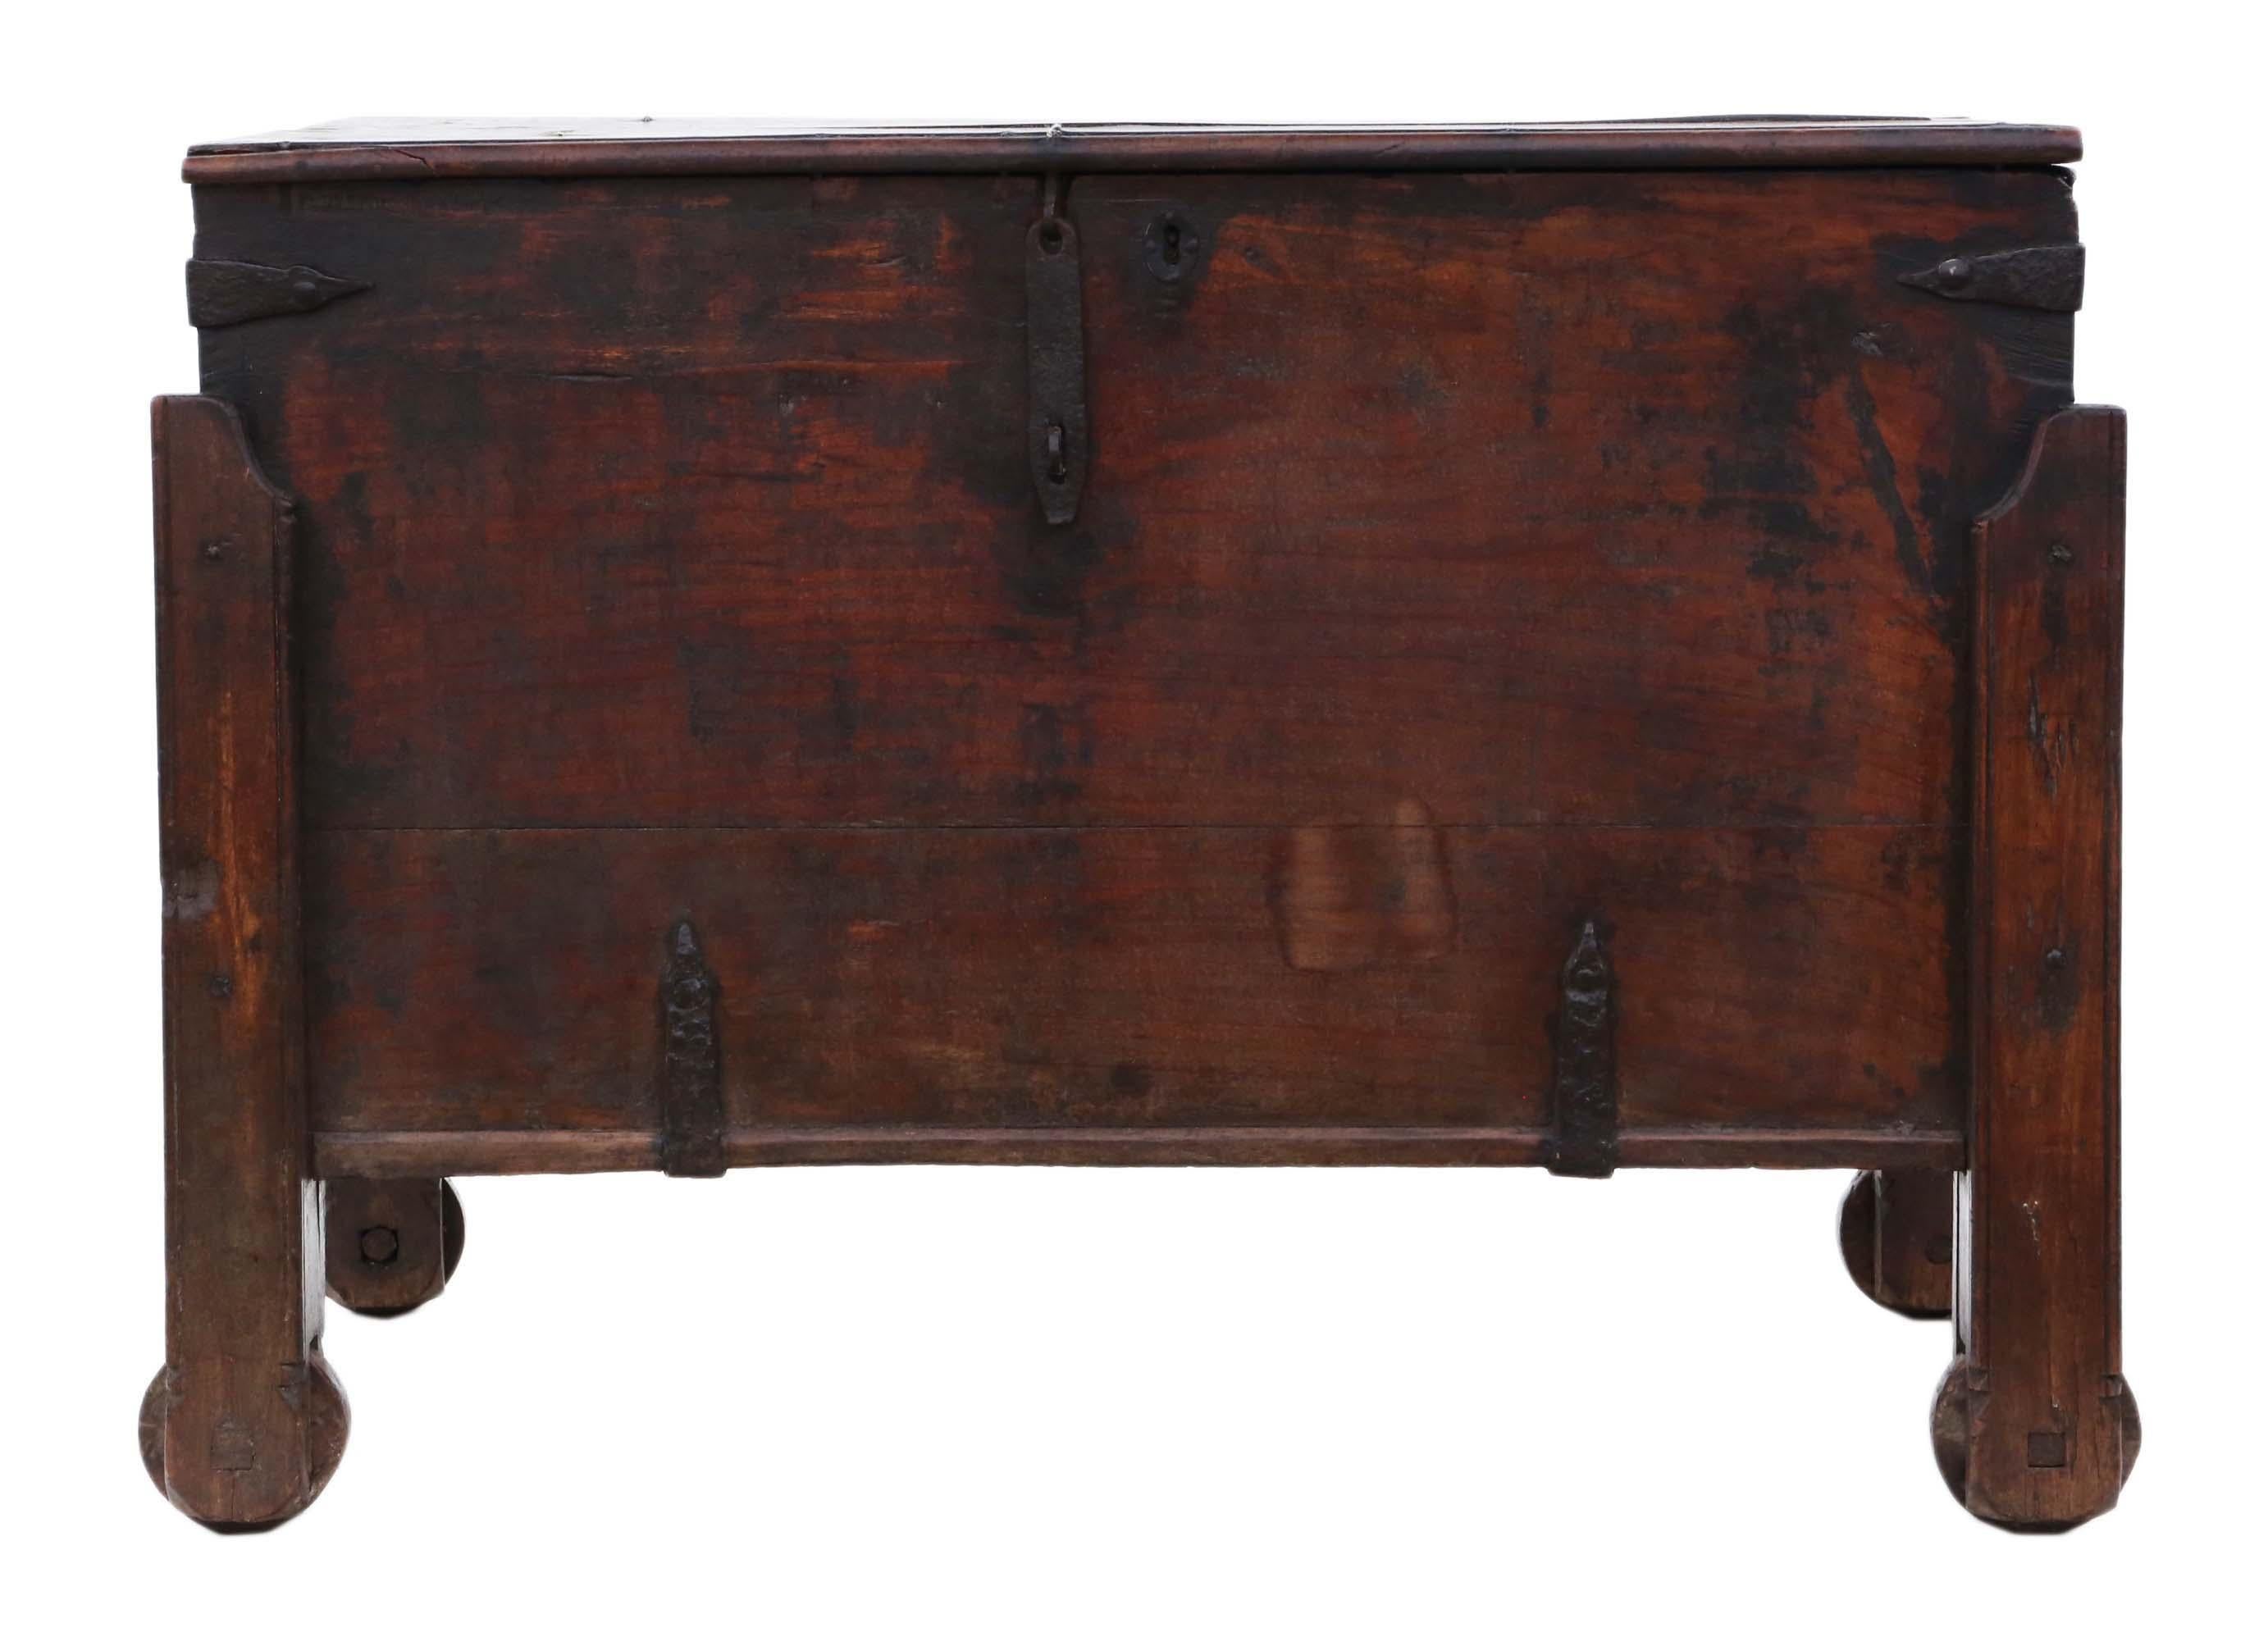 Antique 18th Century Indian Oriental Hardwood Coffer Chest In Good Condition For Sale In Wisbech, Cambridgeshire